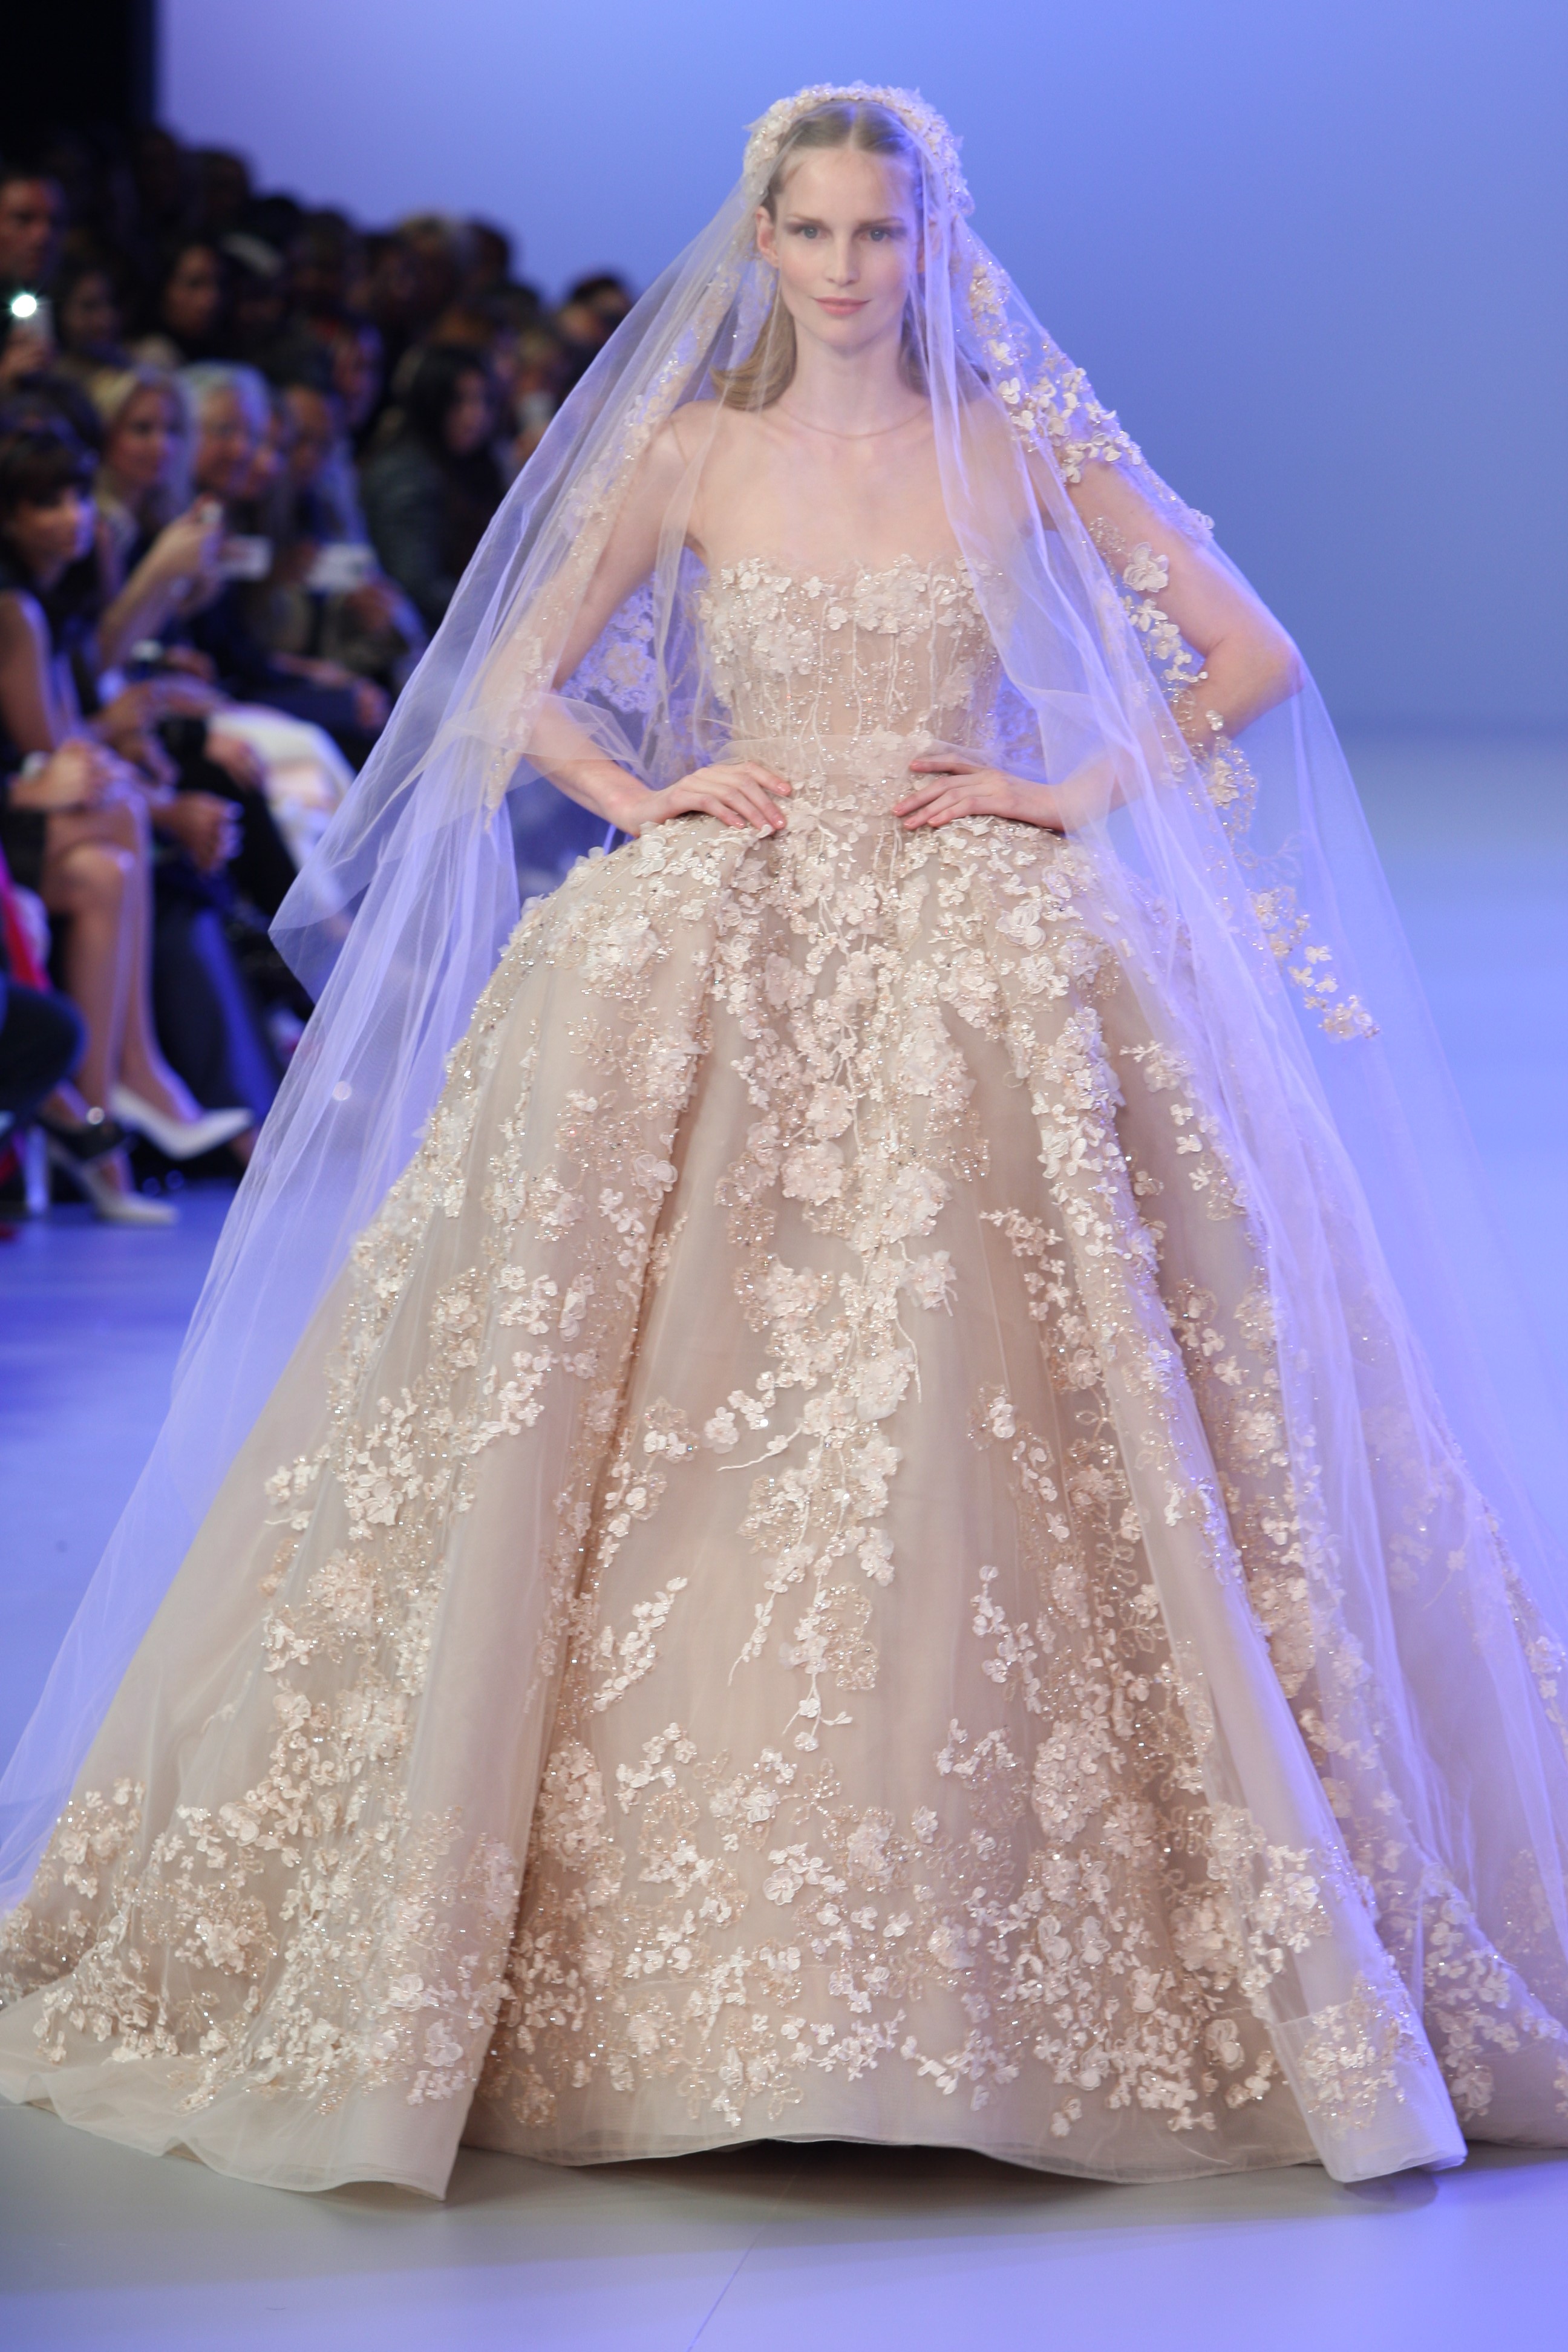 5 Haute Couture Wedding Ivory Lace Fabric Designs